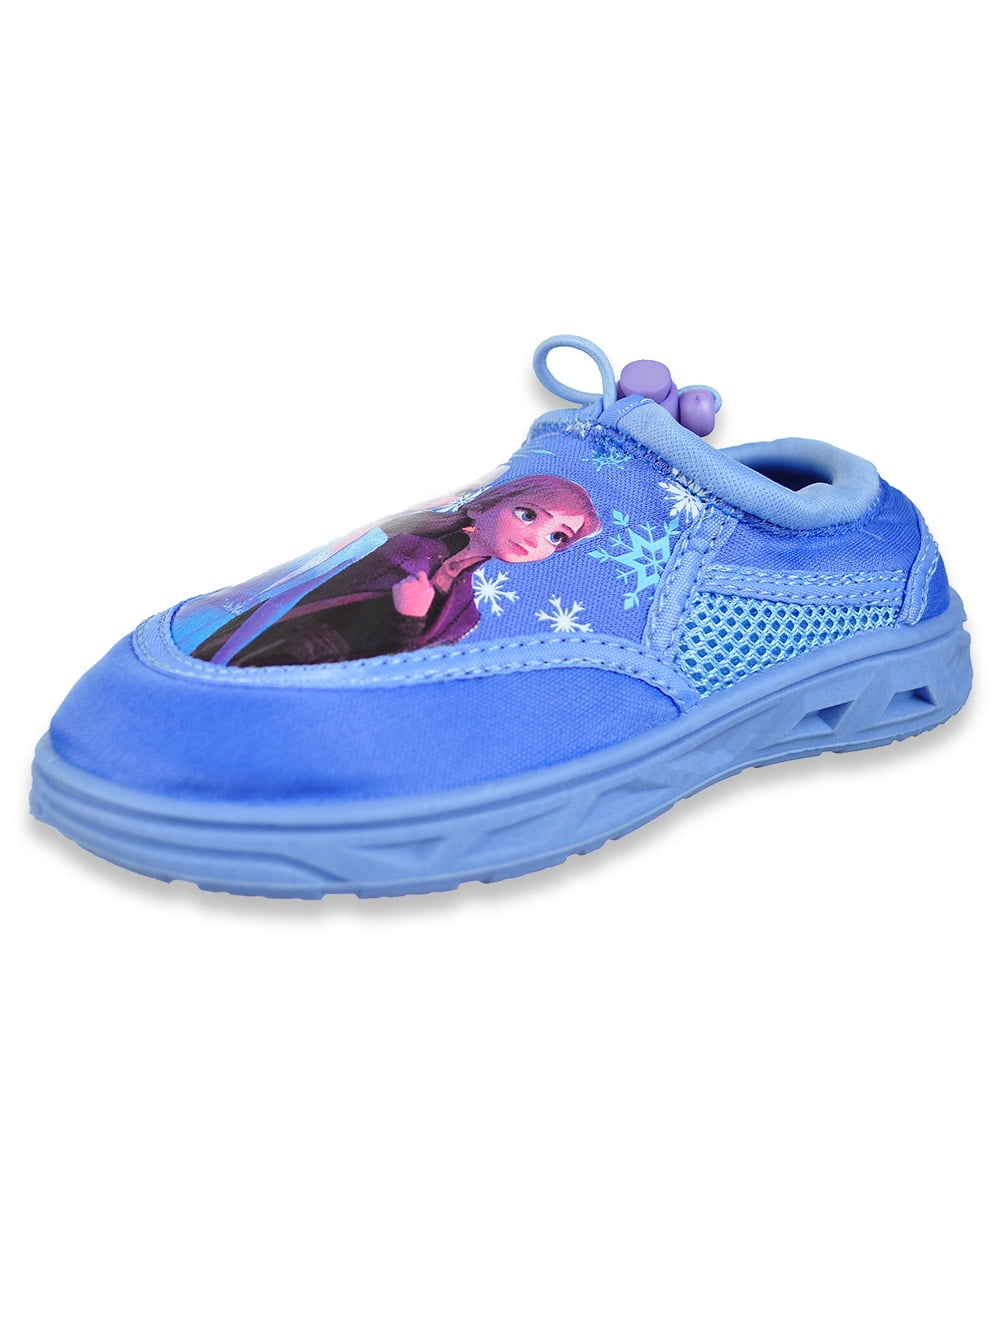 Details about   NEW GIRLS NEWTZ WATER SHOES SIZE 11/12 